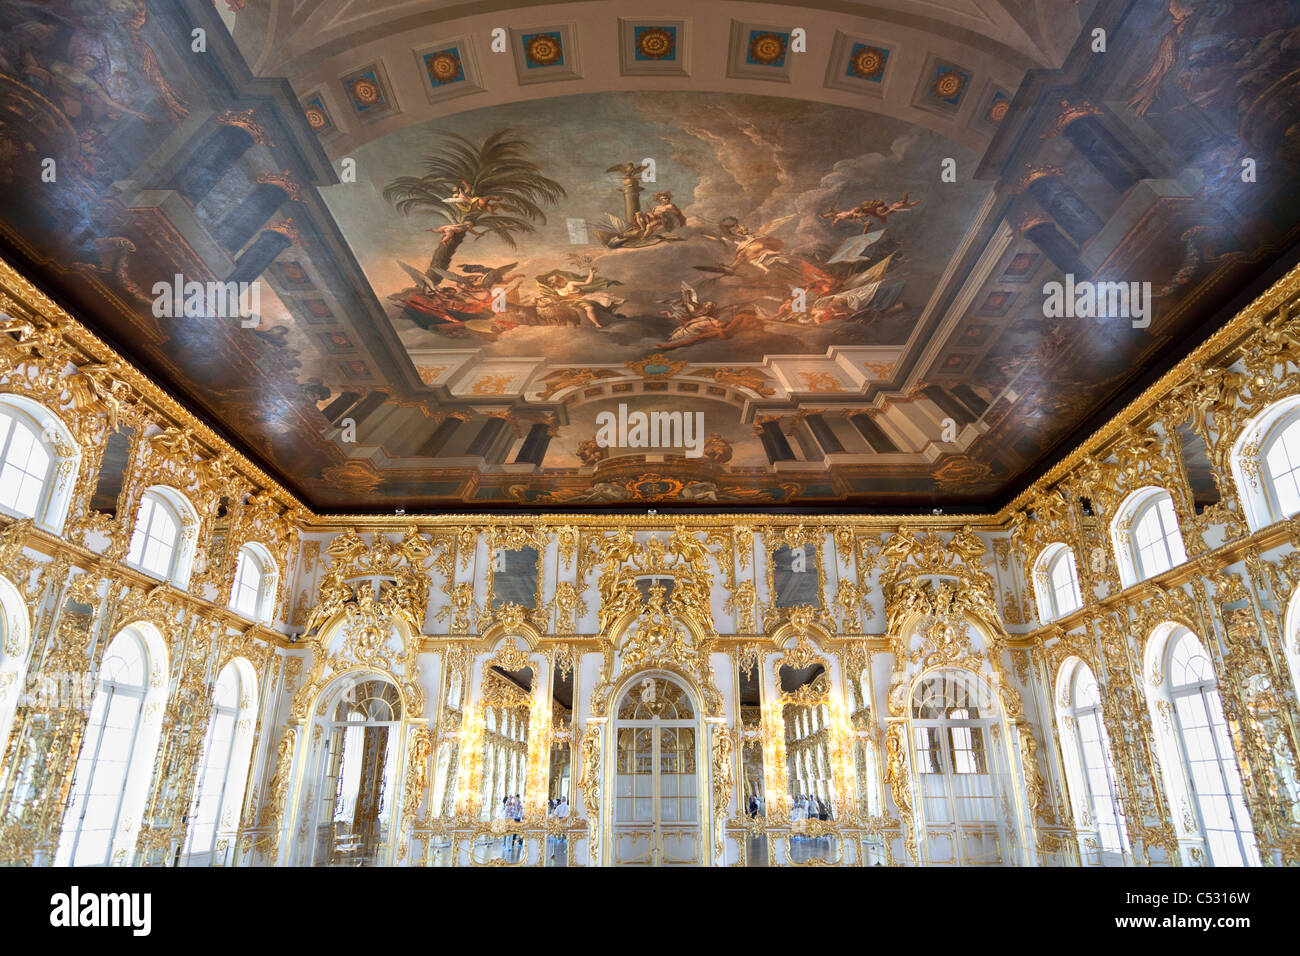 The Catherine Palace, St Petersburg Russia - Great Ballroom 6 Stock Photo